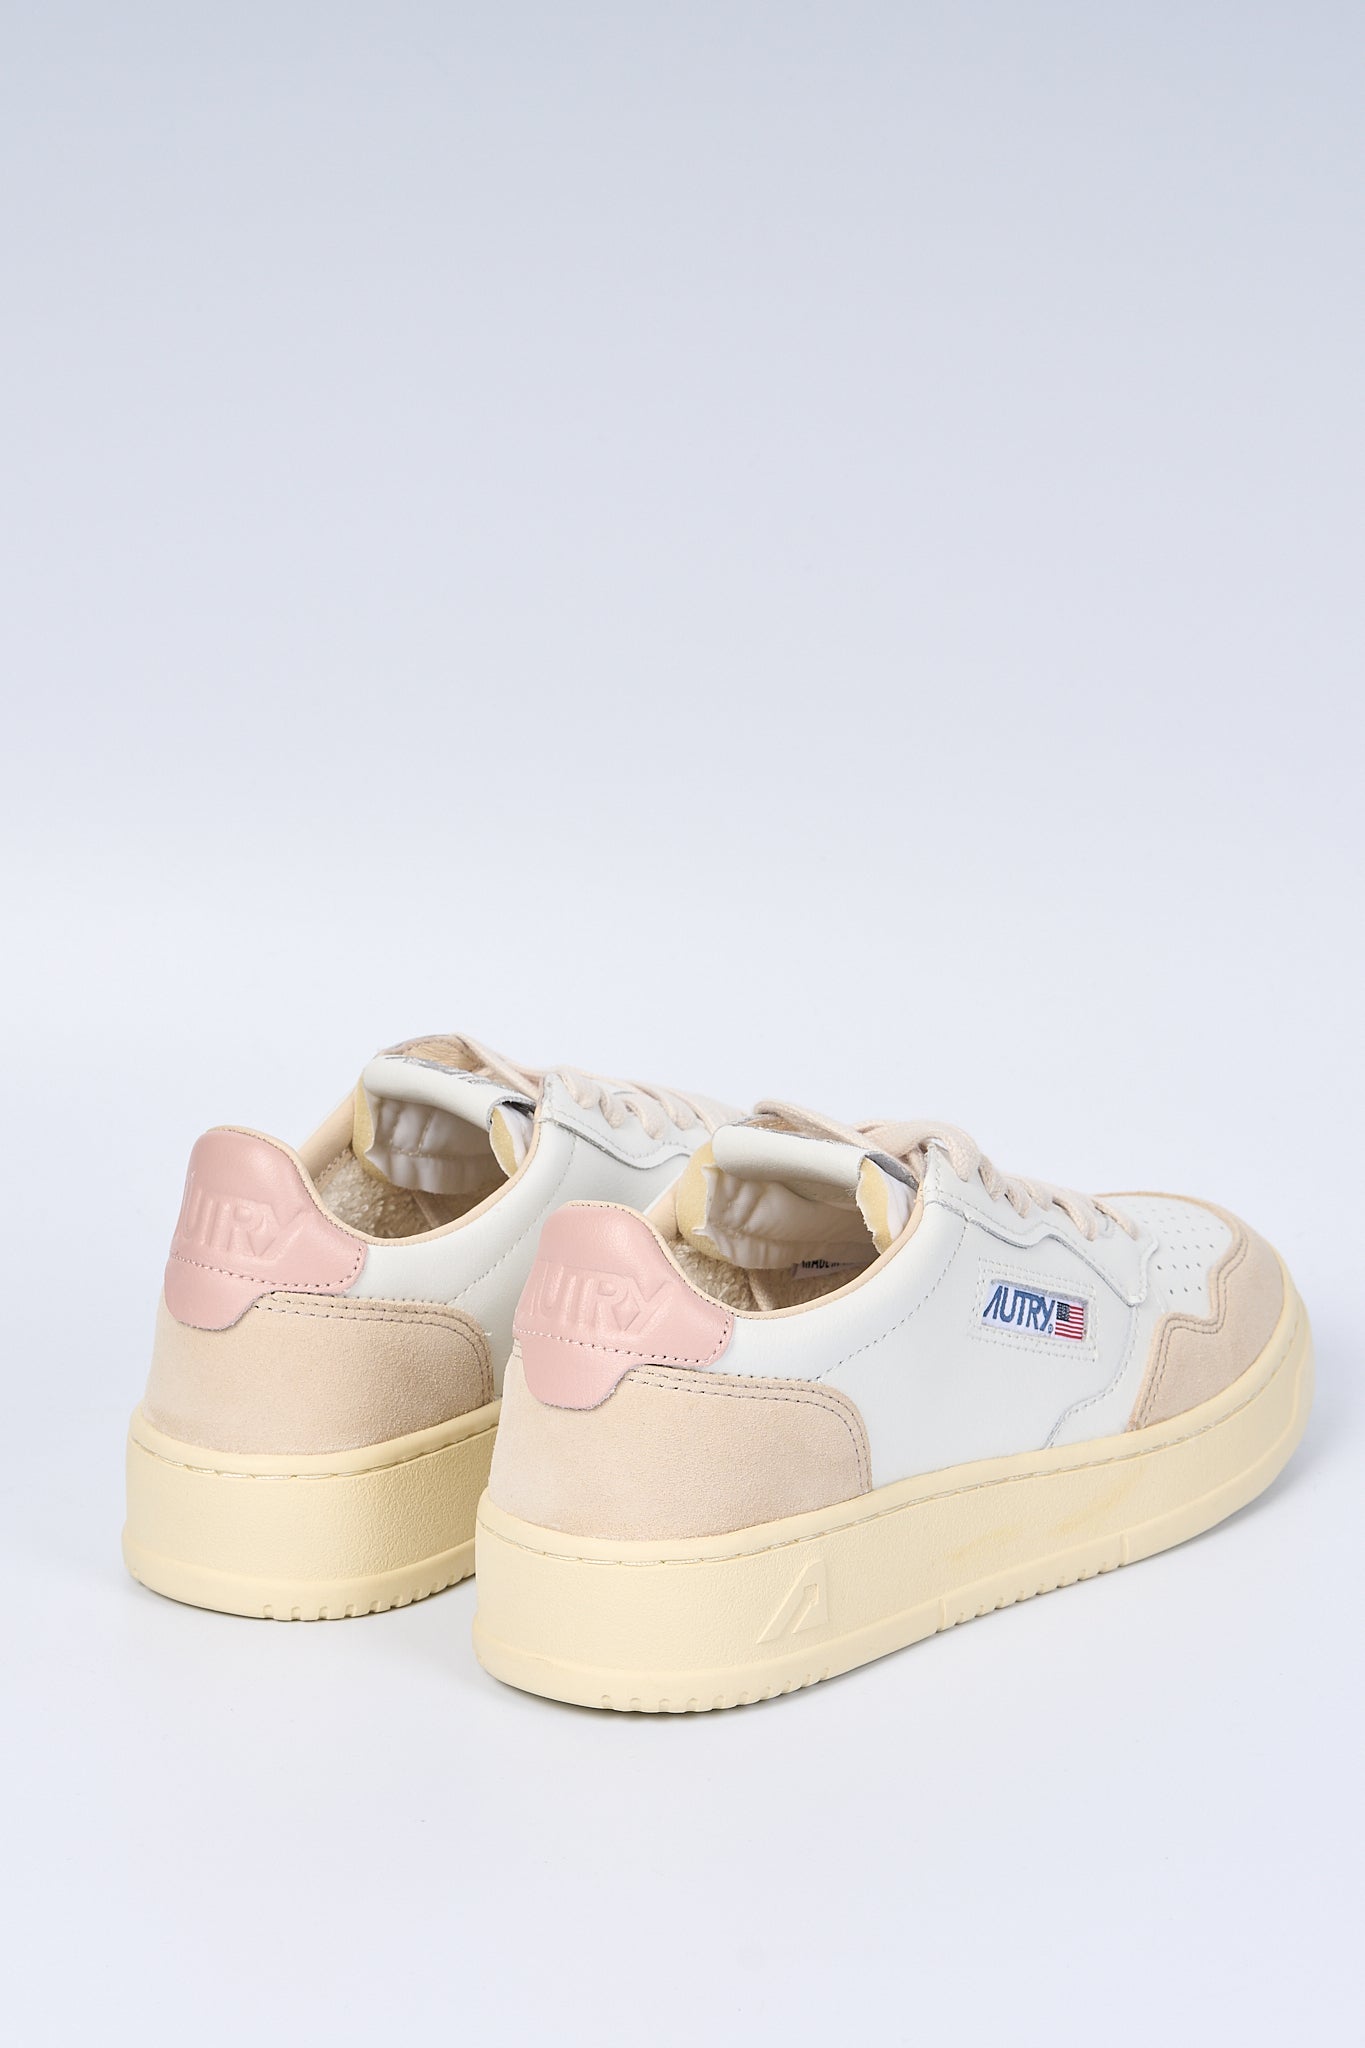 Autry Sneaker Bianco/Rosa Donna-4